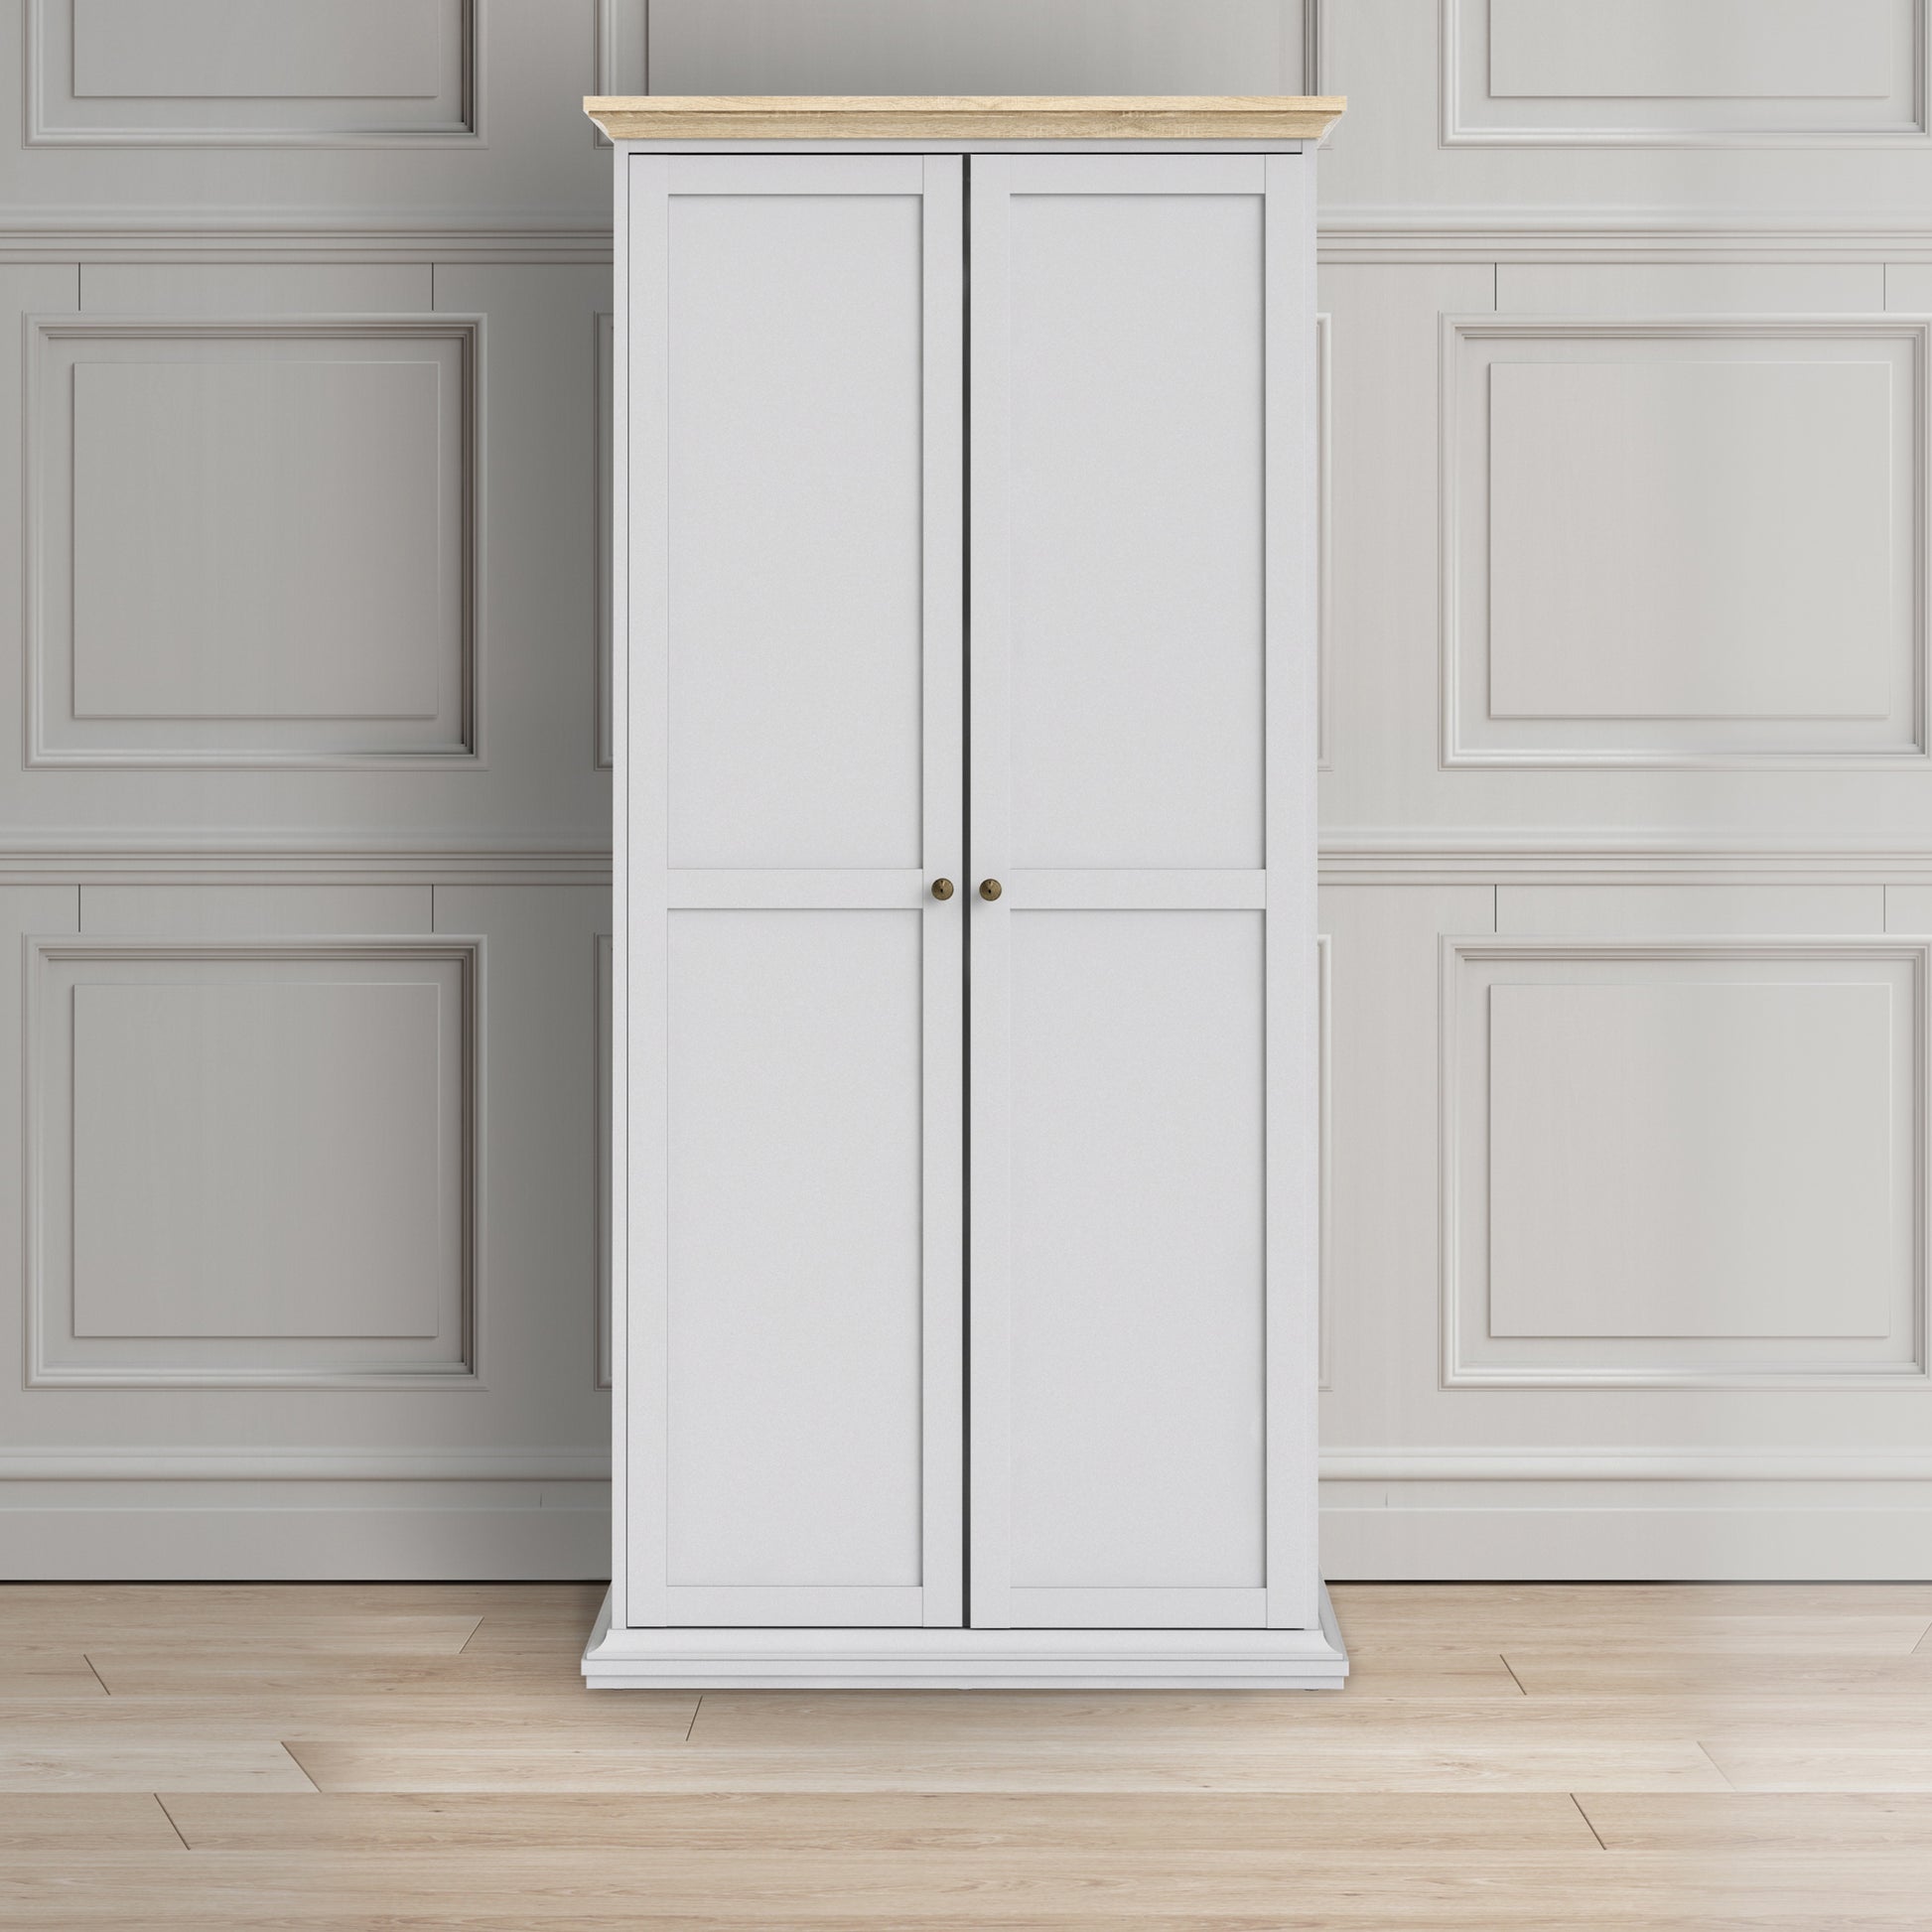 Paris  Wardrobe with 2 Doors in White and Oak